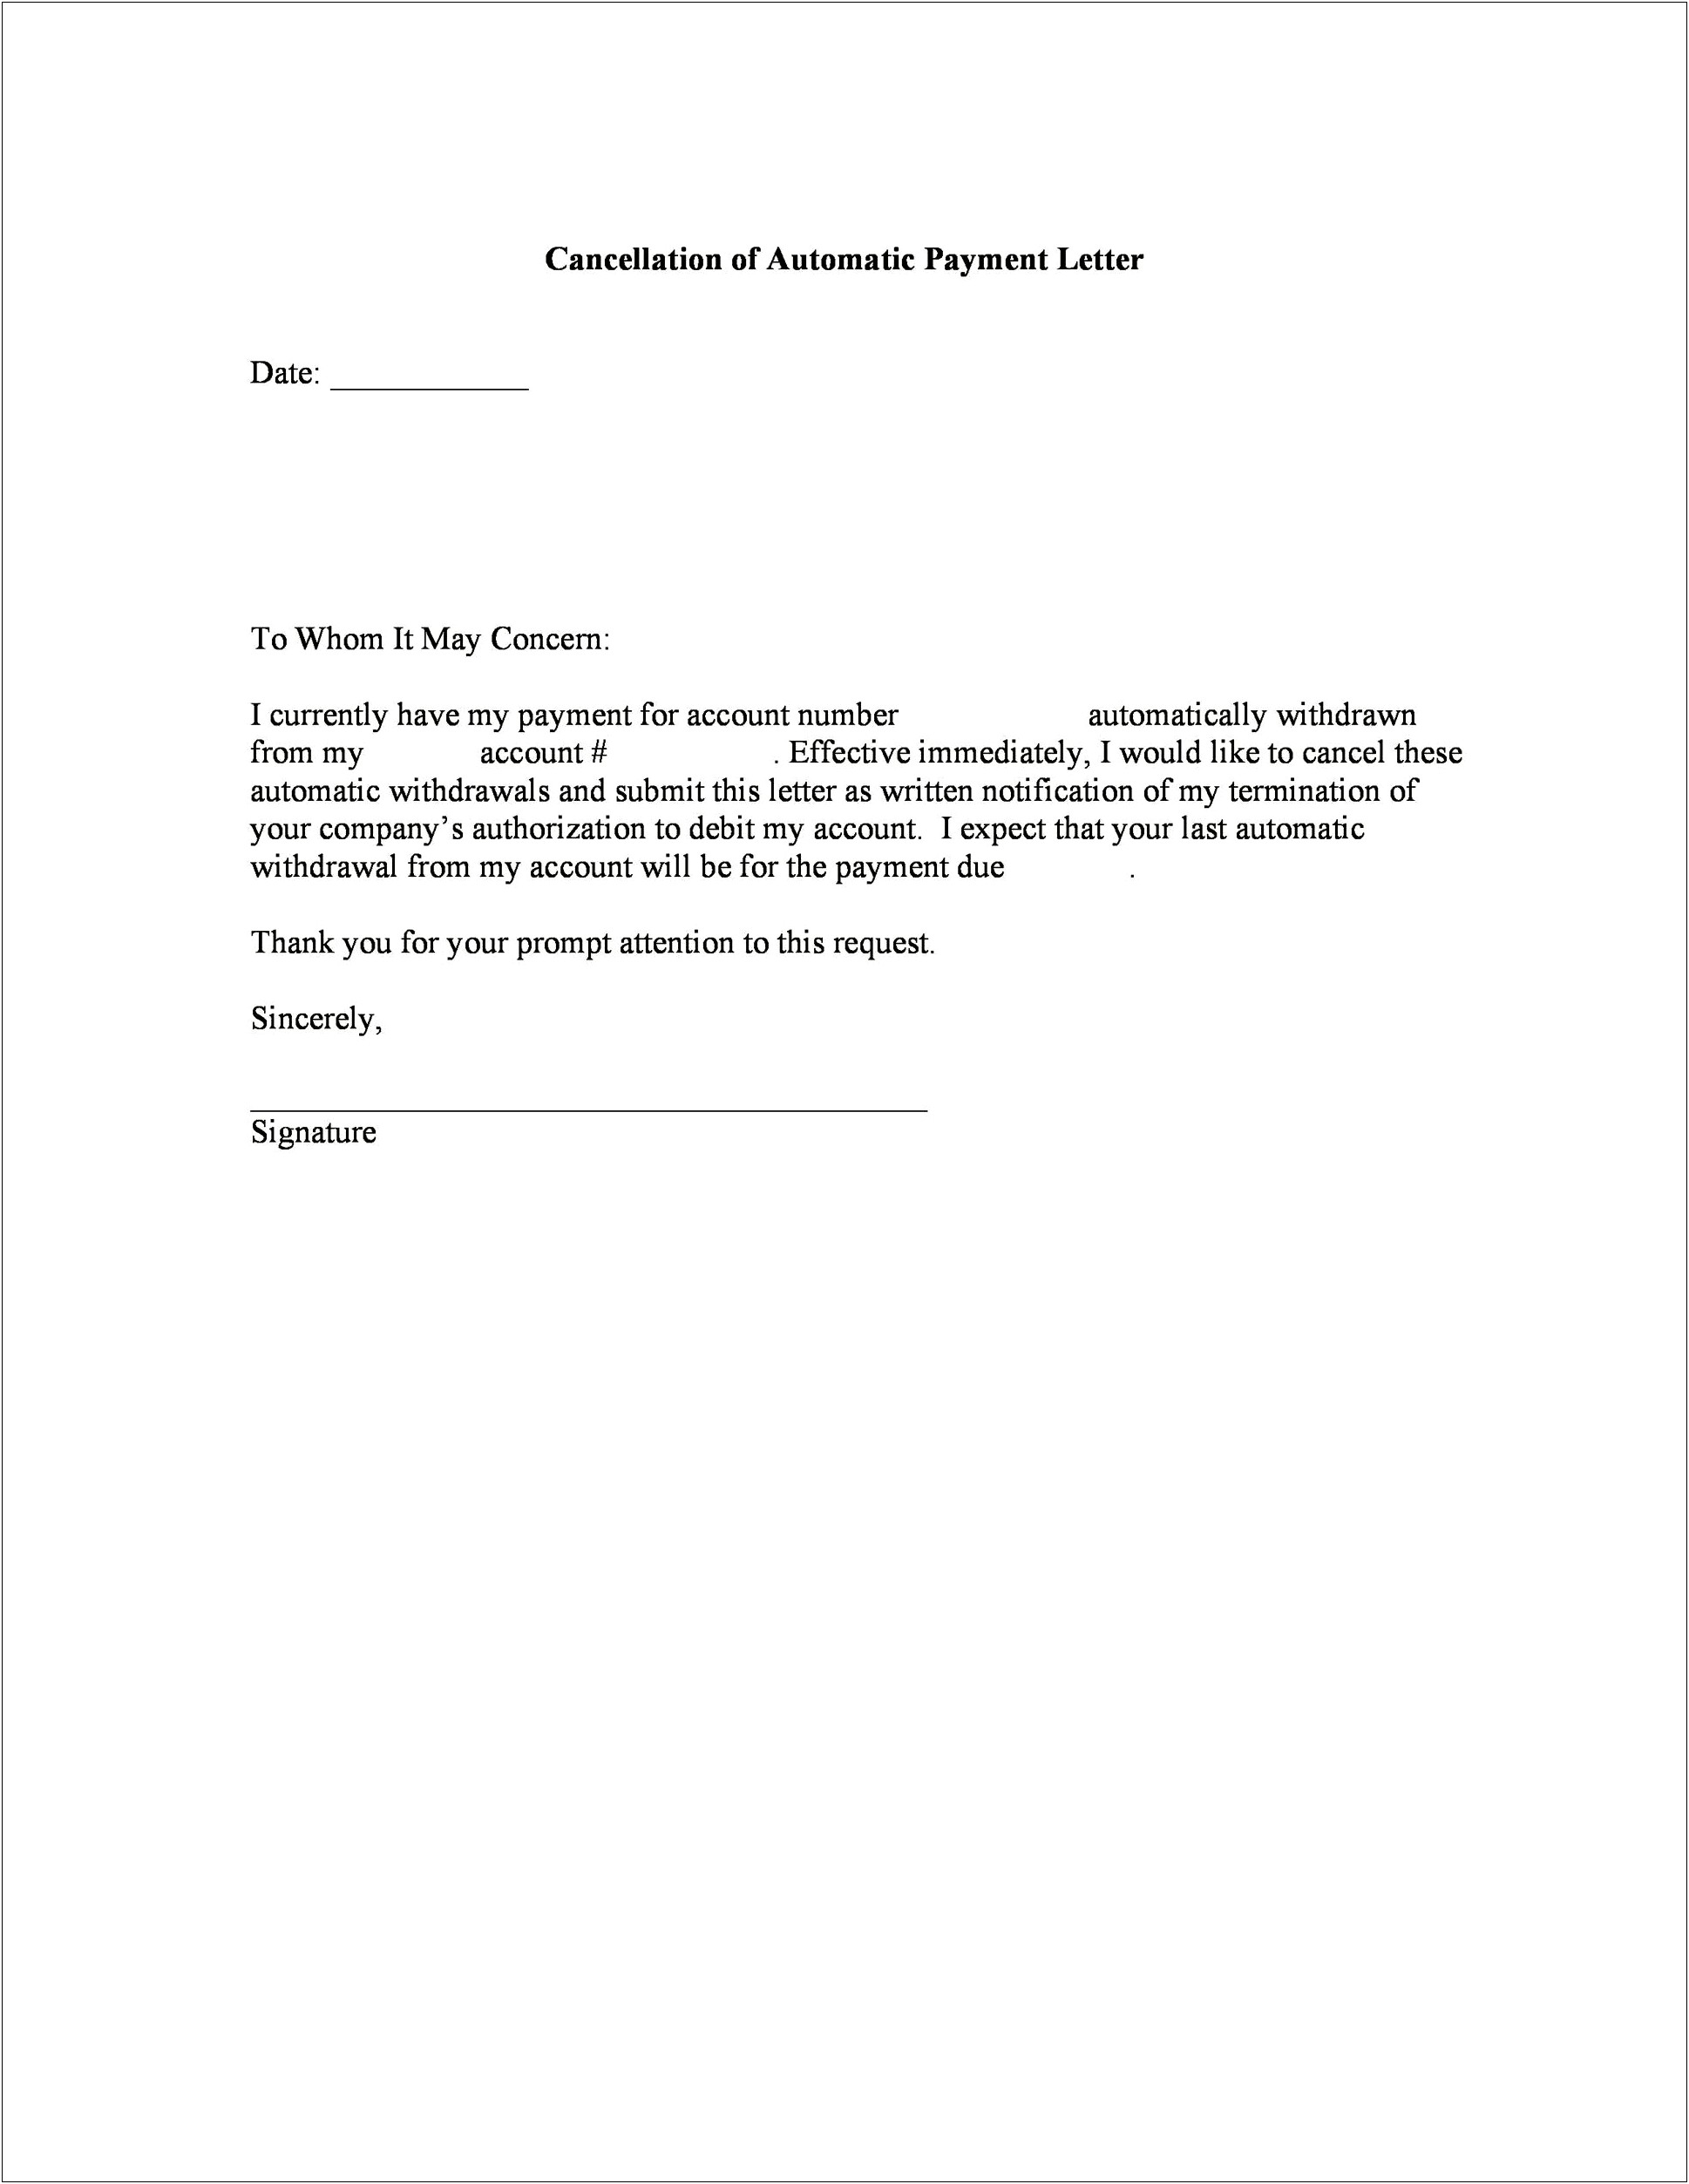 Cancel My Telephone Account Letter Template